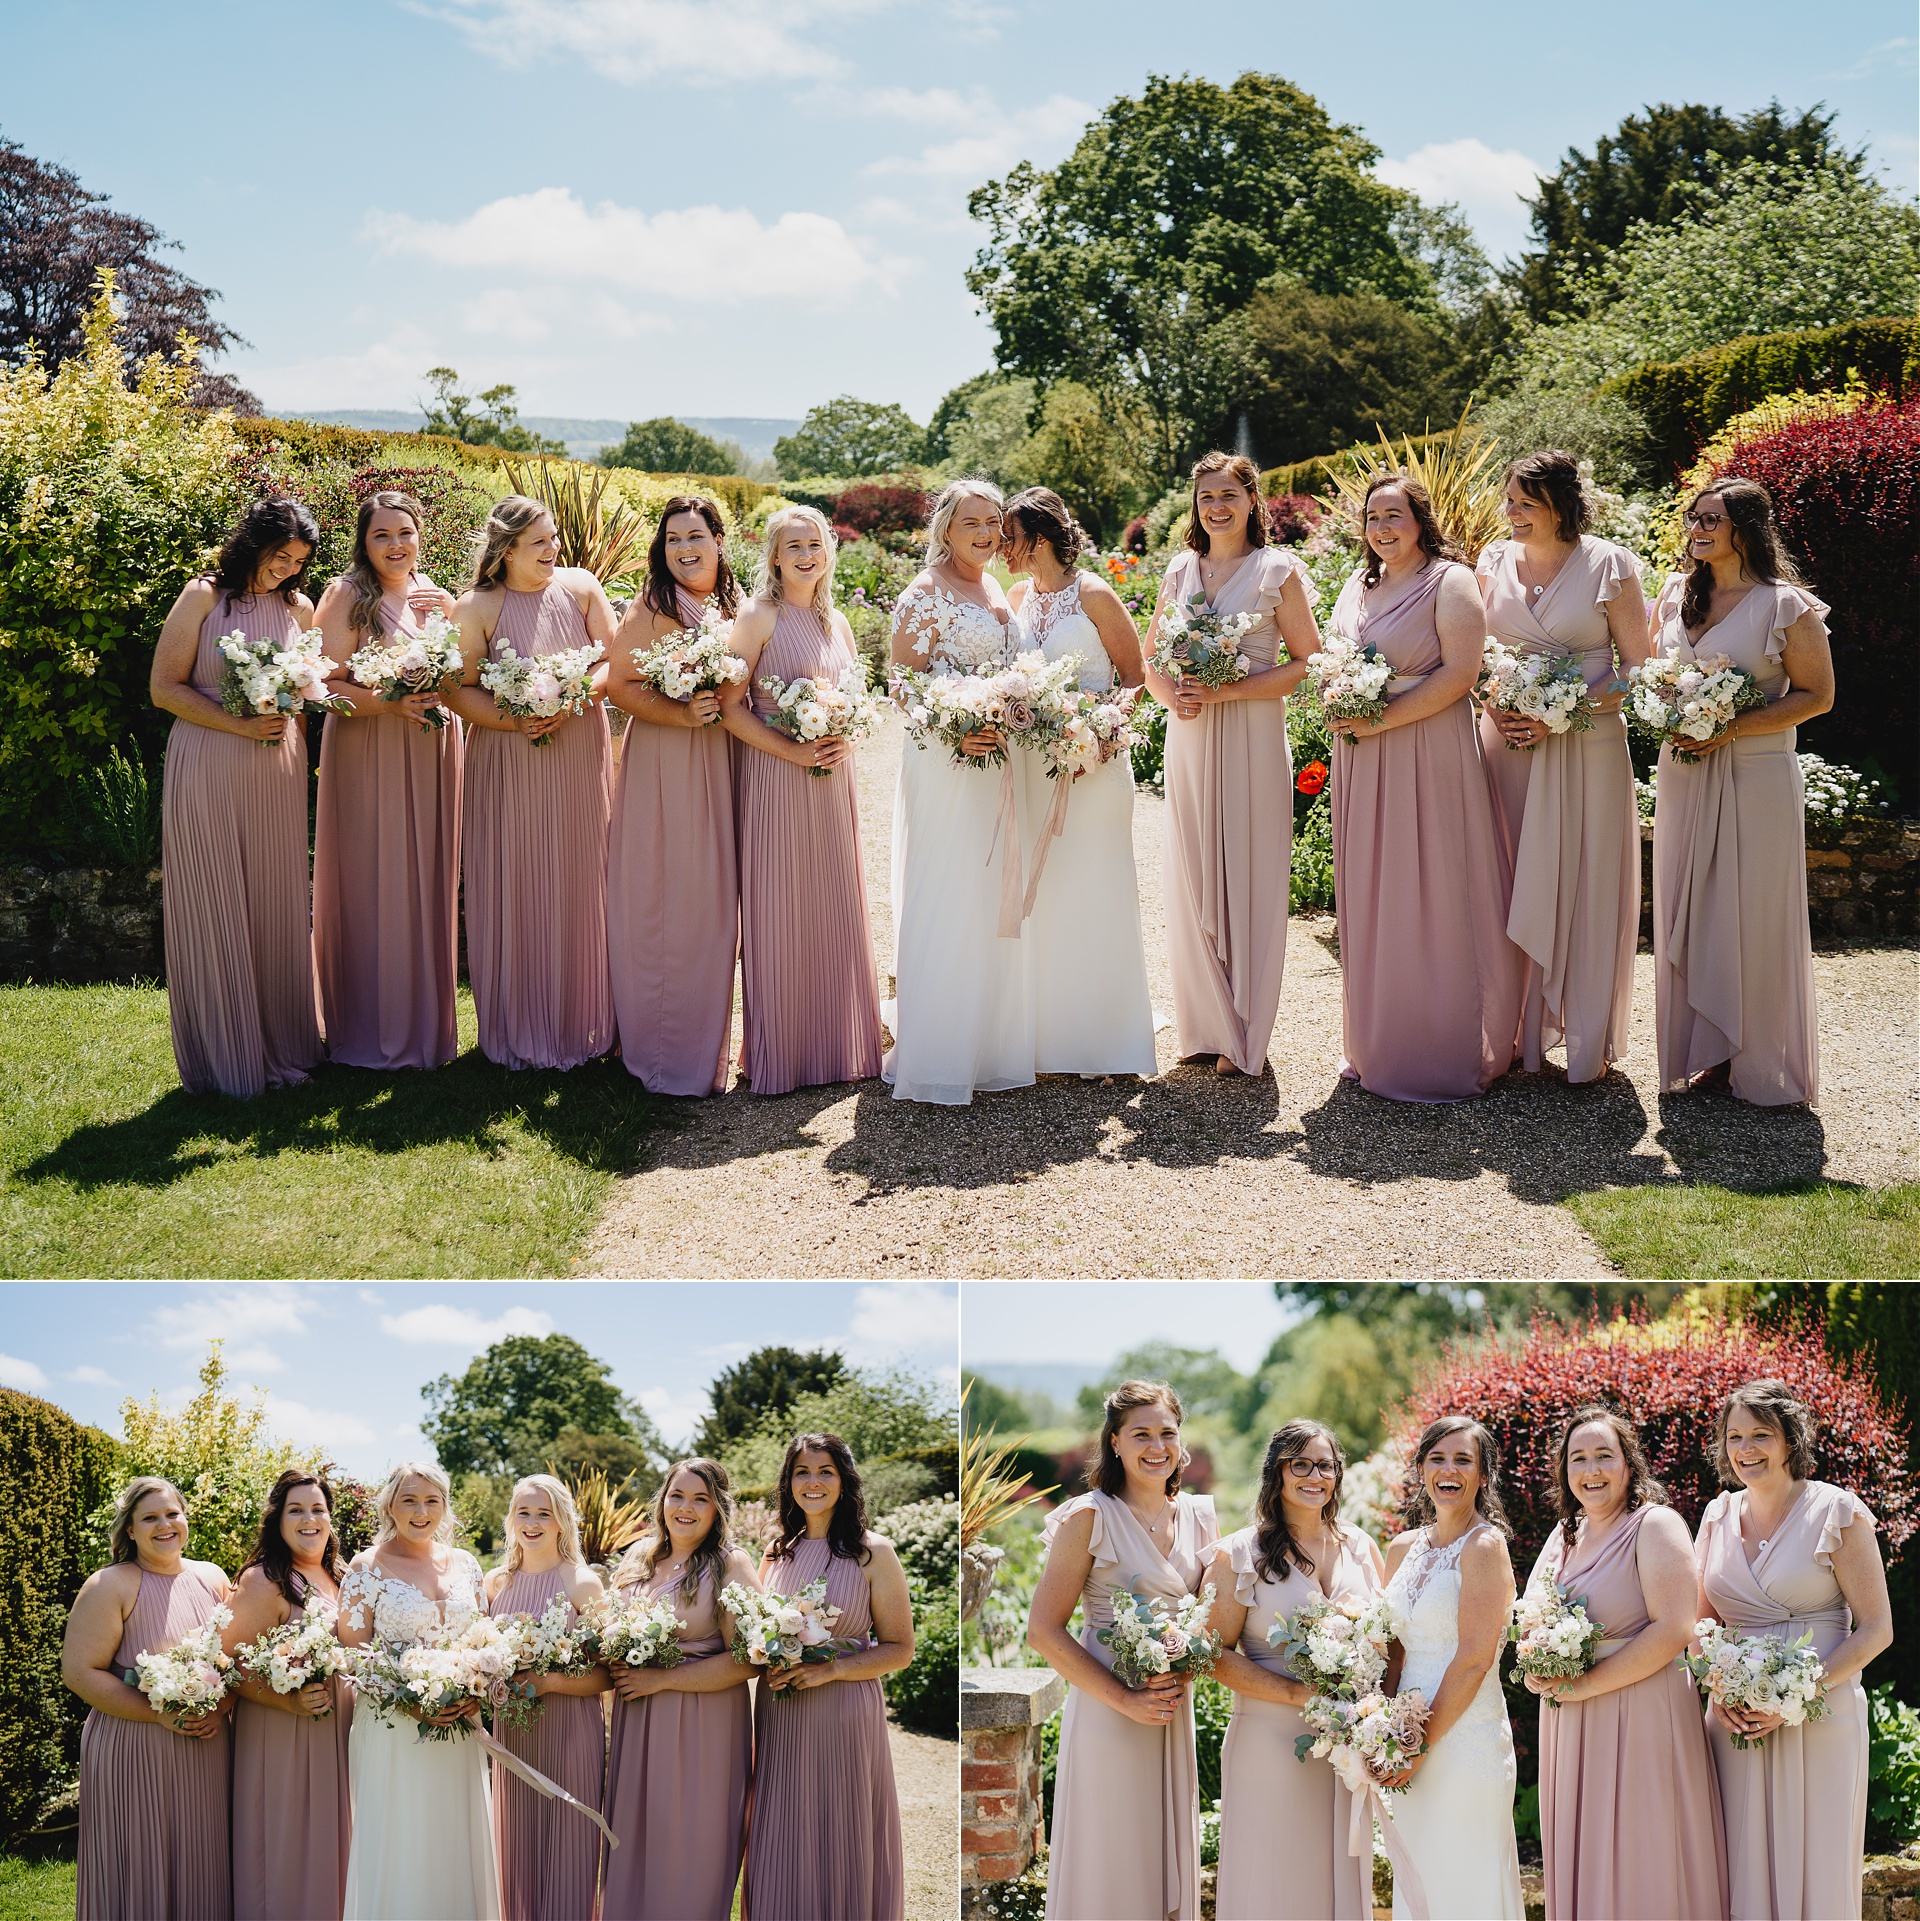 Wedding group photo with two brides and bridesmaids in pink dresses